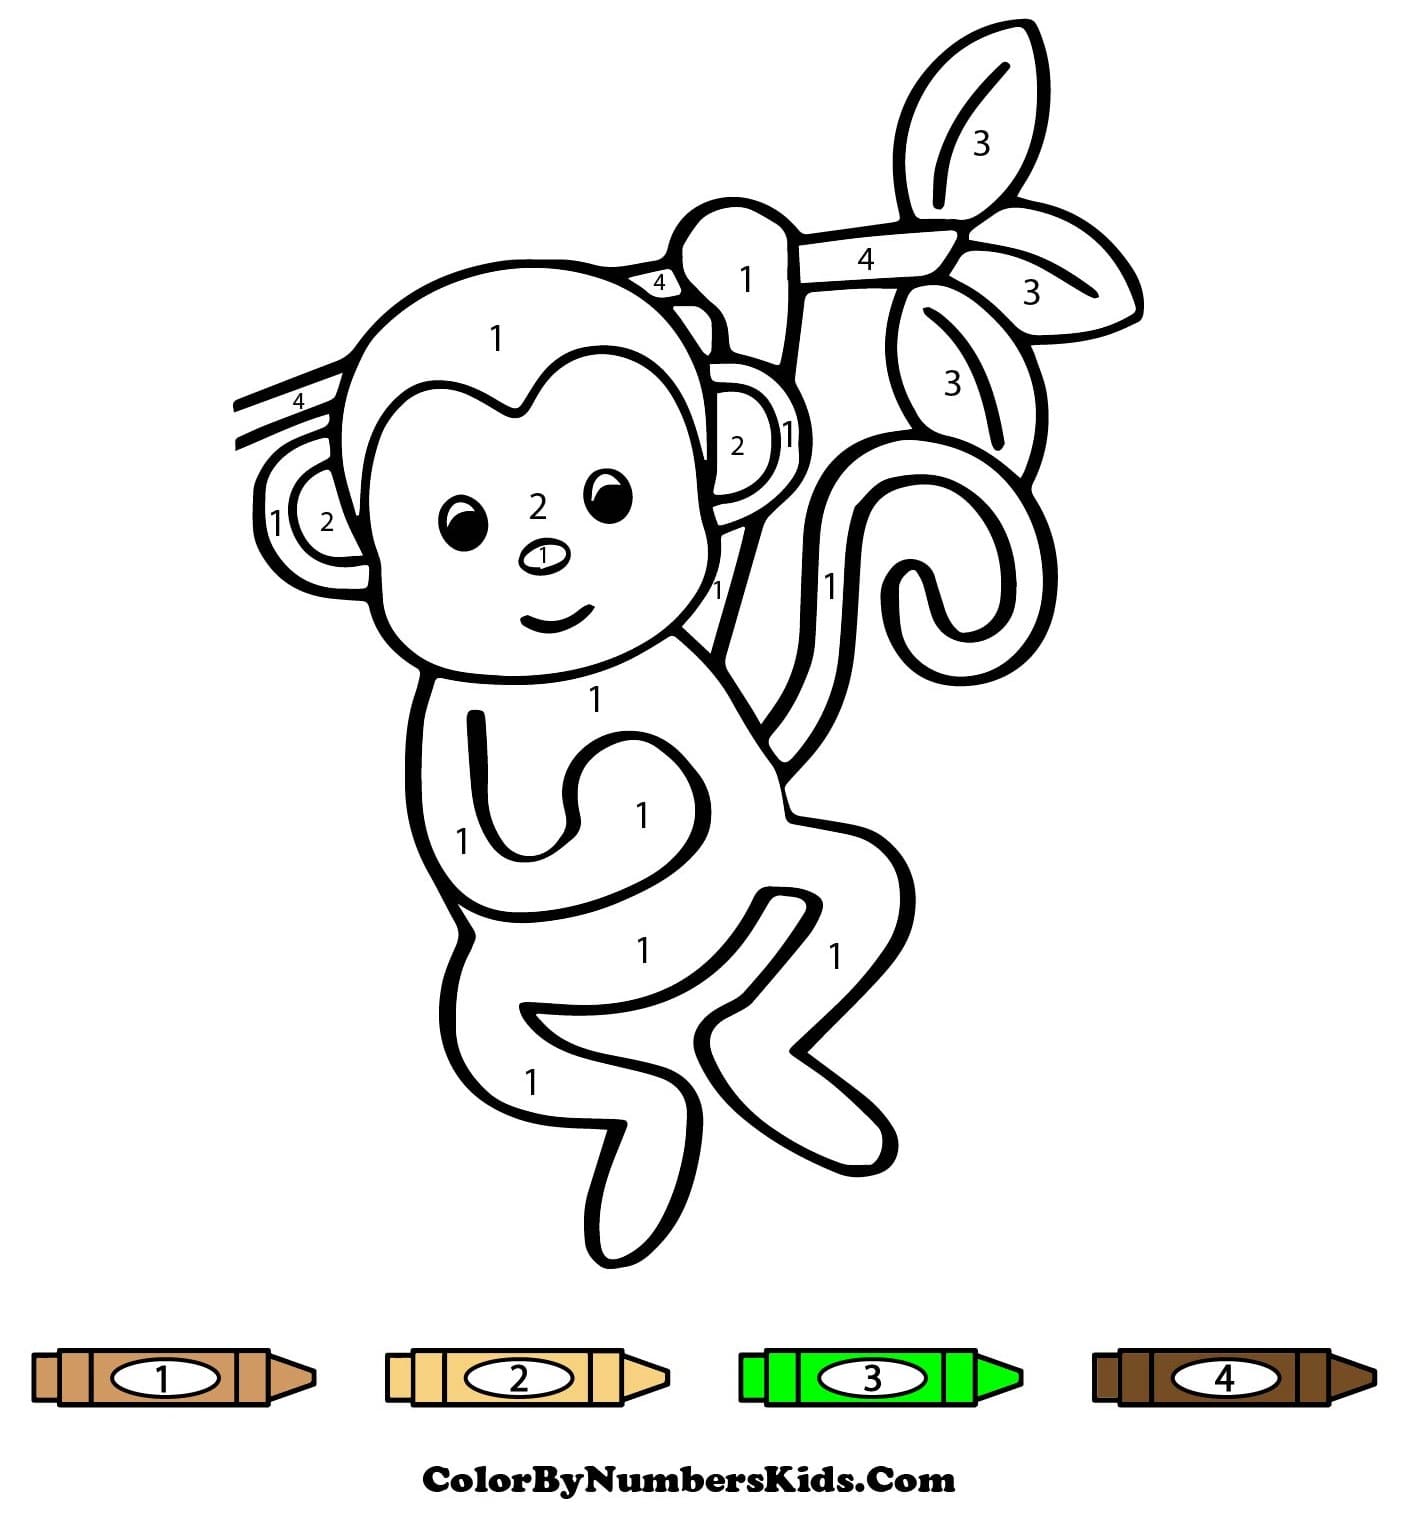 Printable Cute Monkey Color By Number